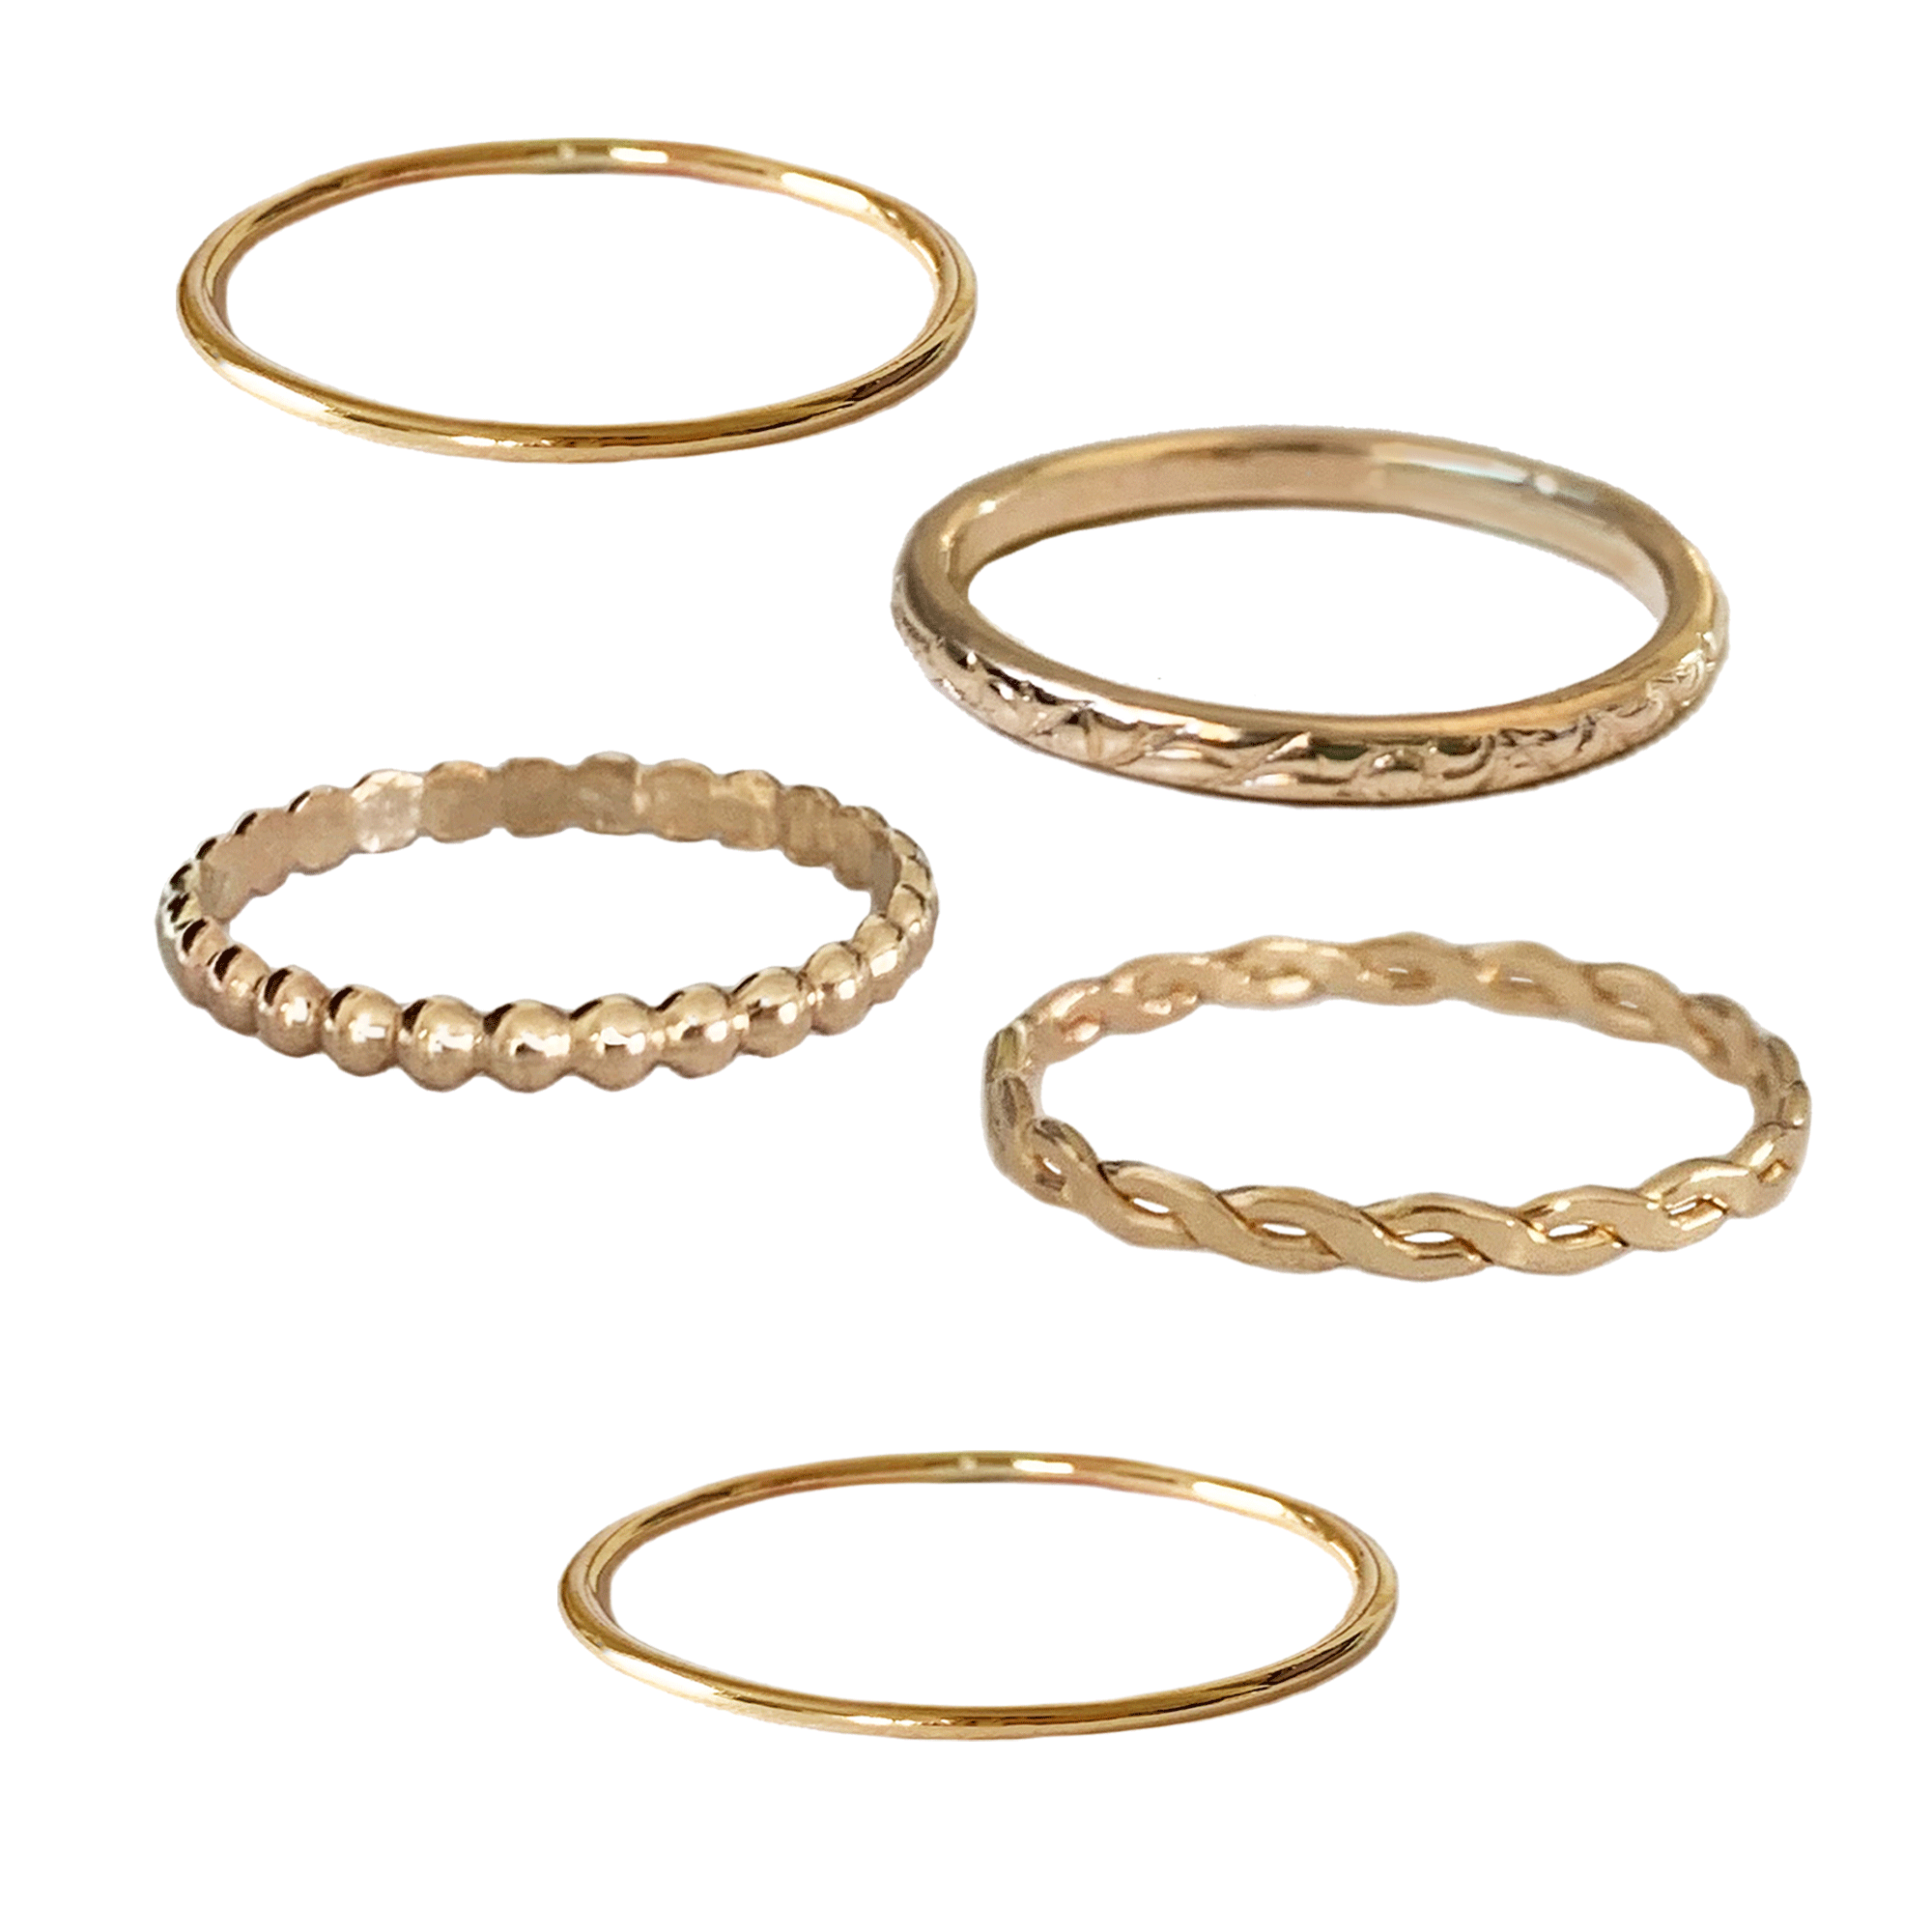 Five Toe Rings Variety Stack - NEW!